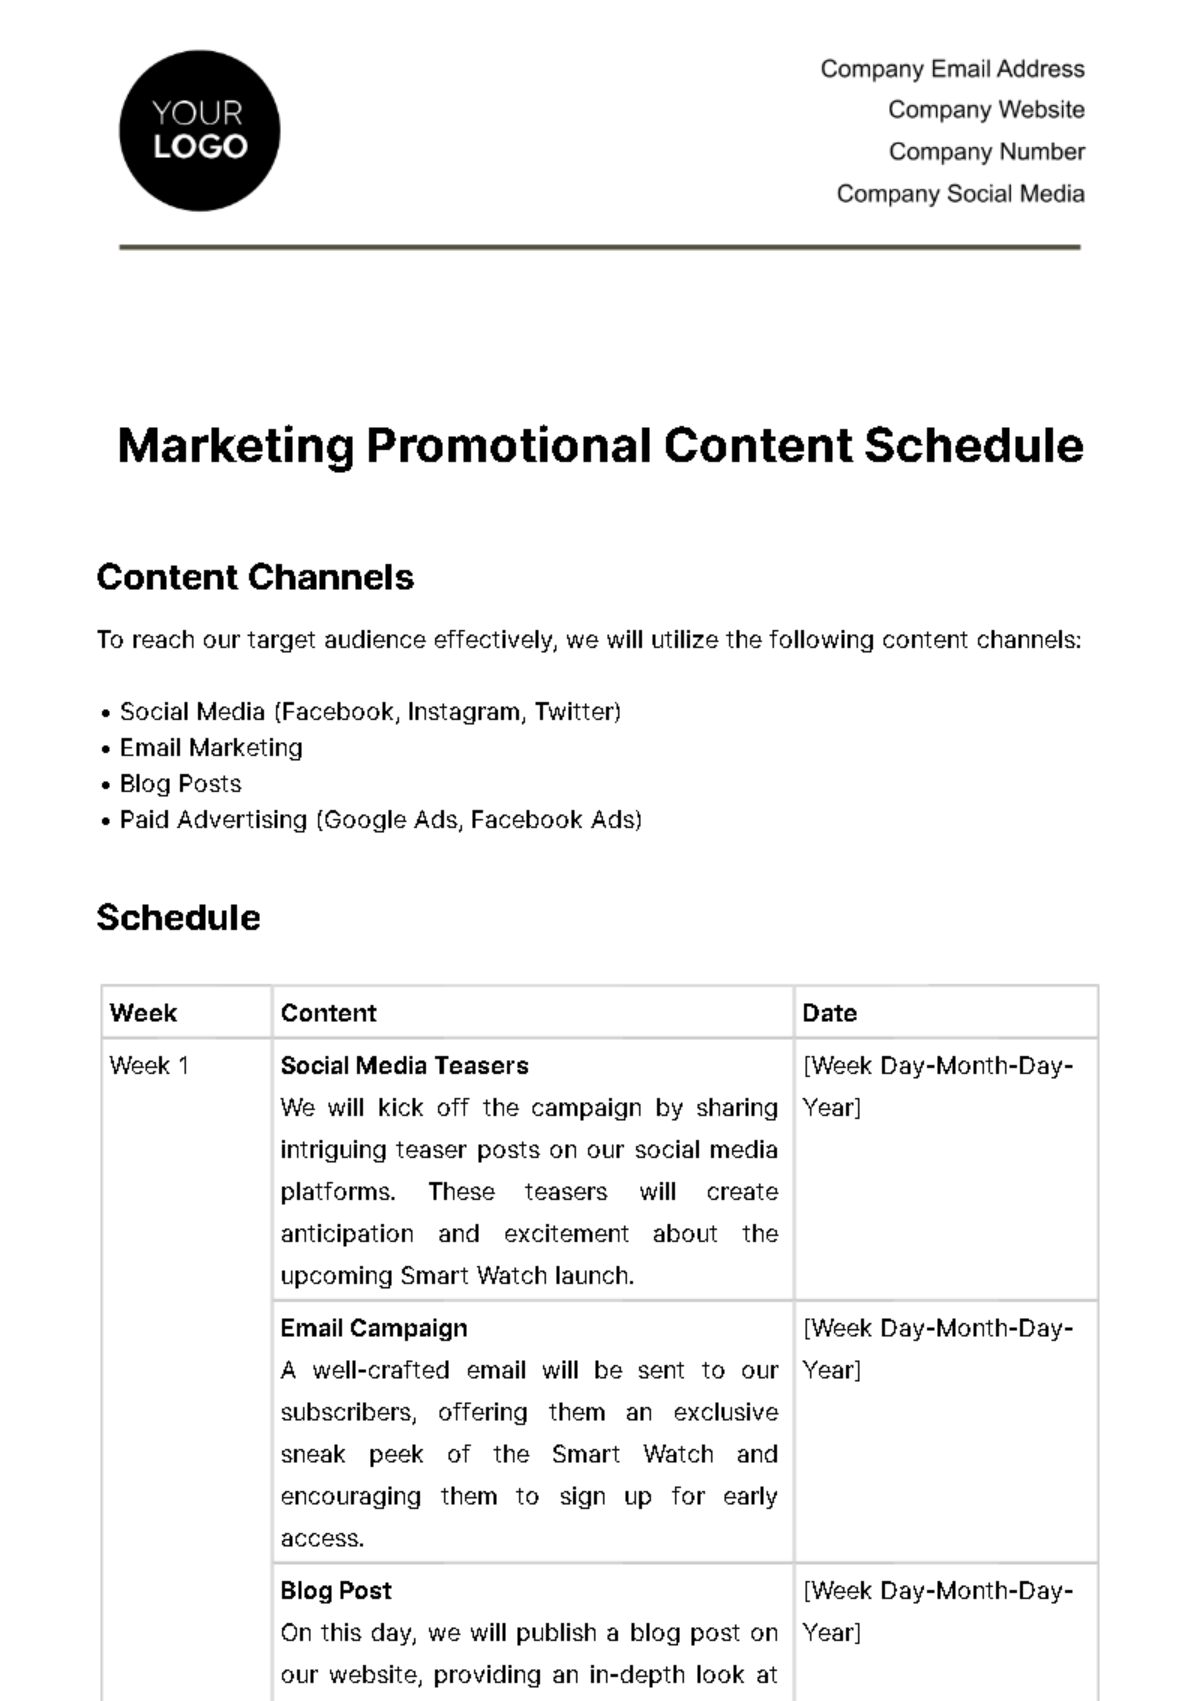 Free Marketing Promotional Content Schedule Template